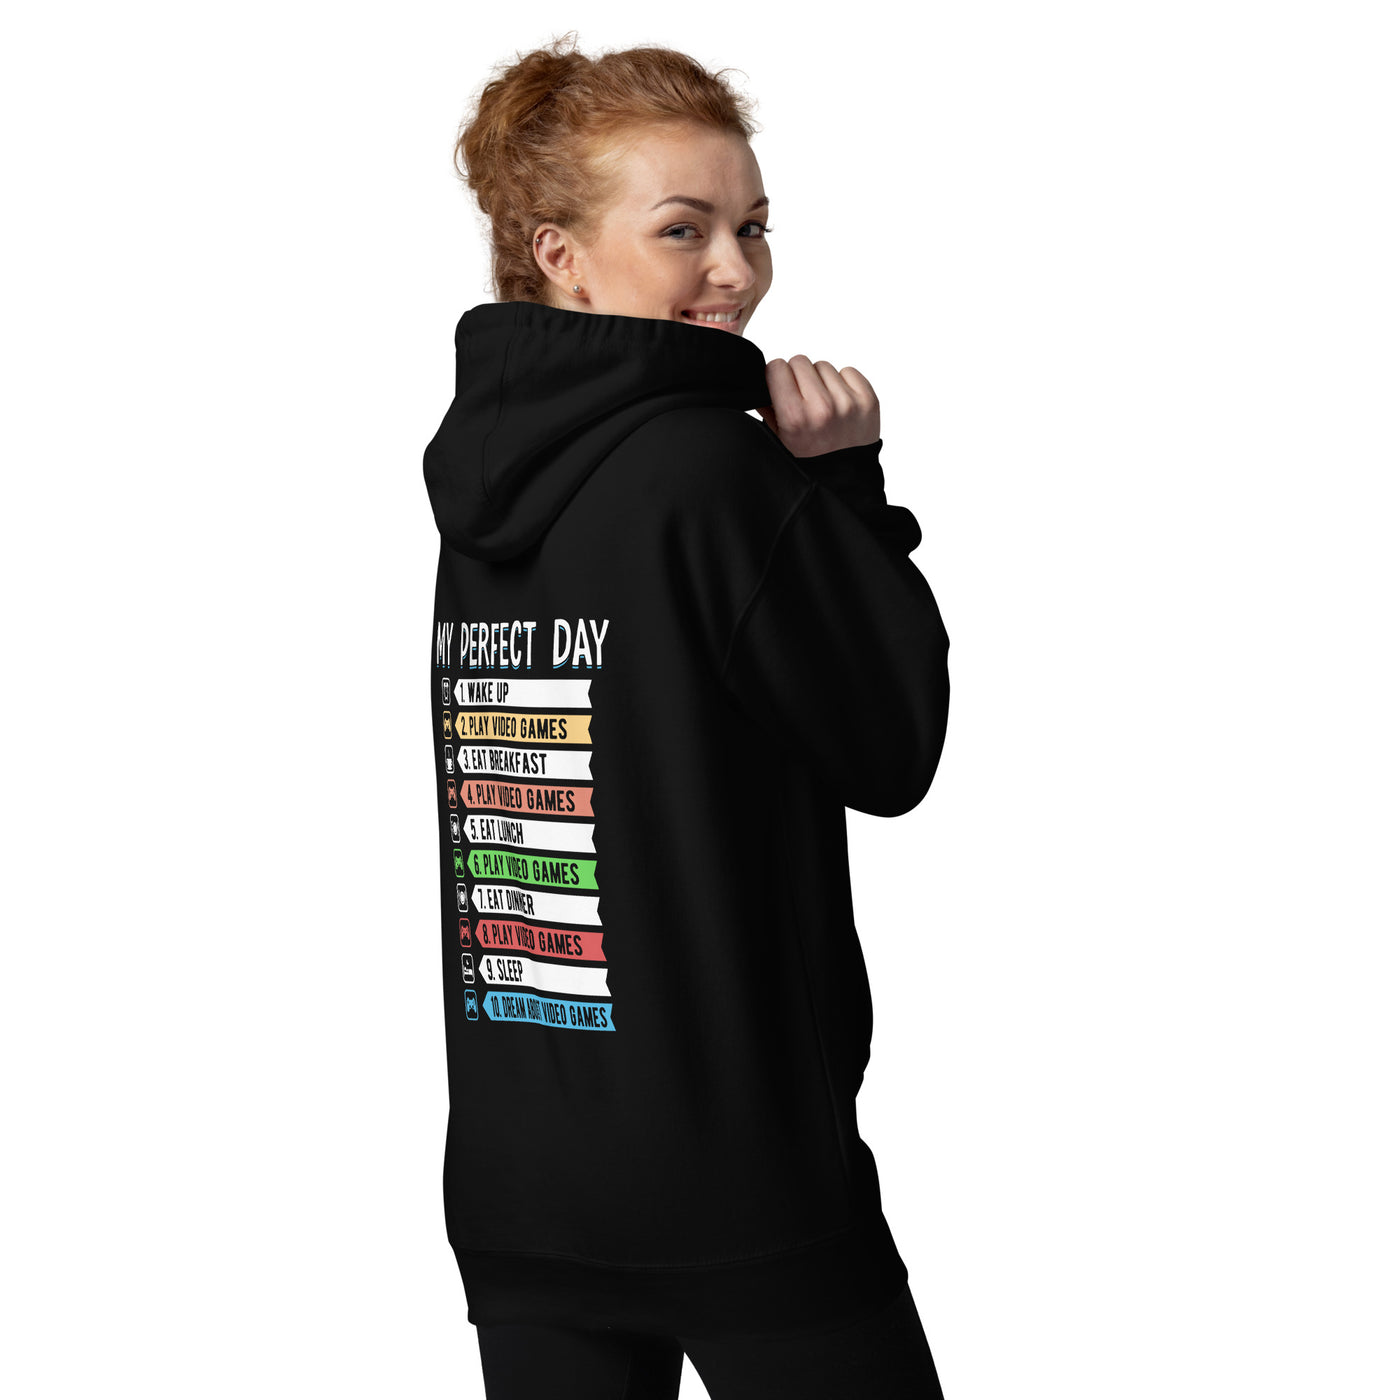 My perfect day wake up play video games Unisex Hoodie ( Back Print )